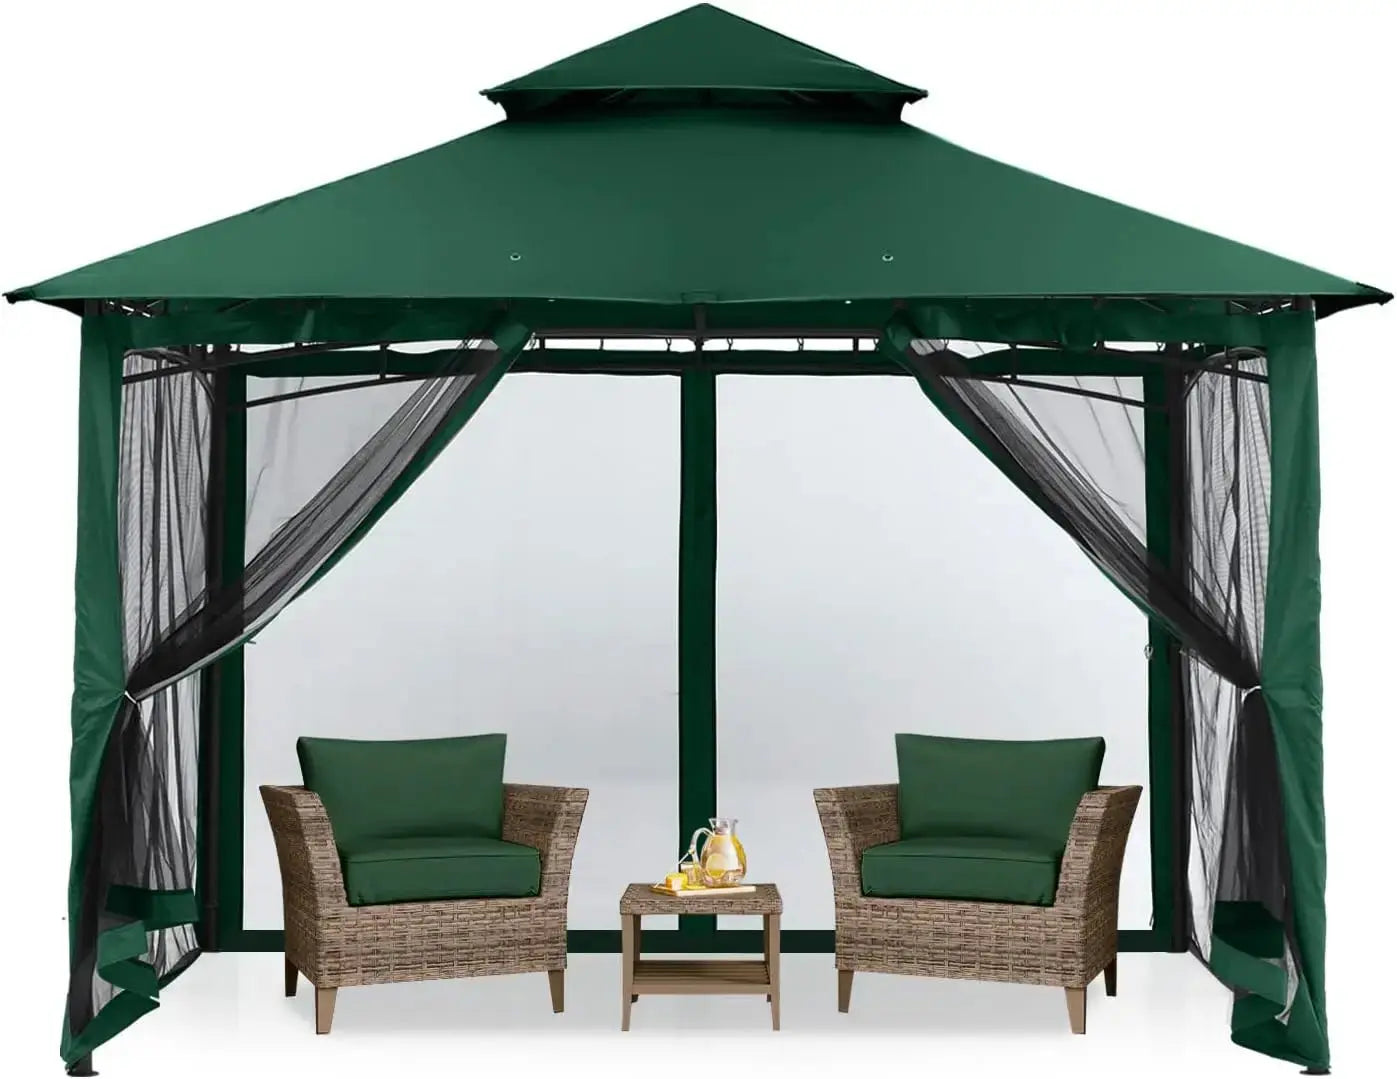 8x8 Outdoor Garden Gazebo for Patios with Stable Steel Frame and Netting Walls - The Greenhouse Pros